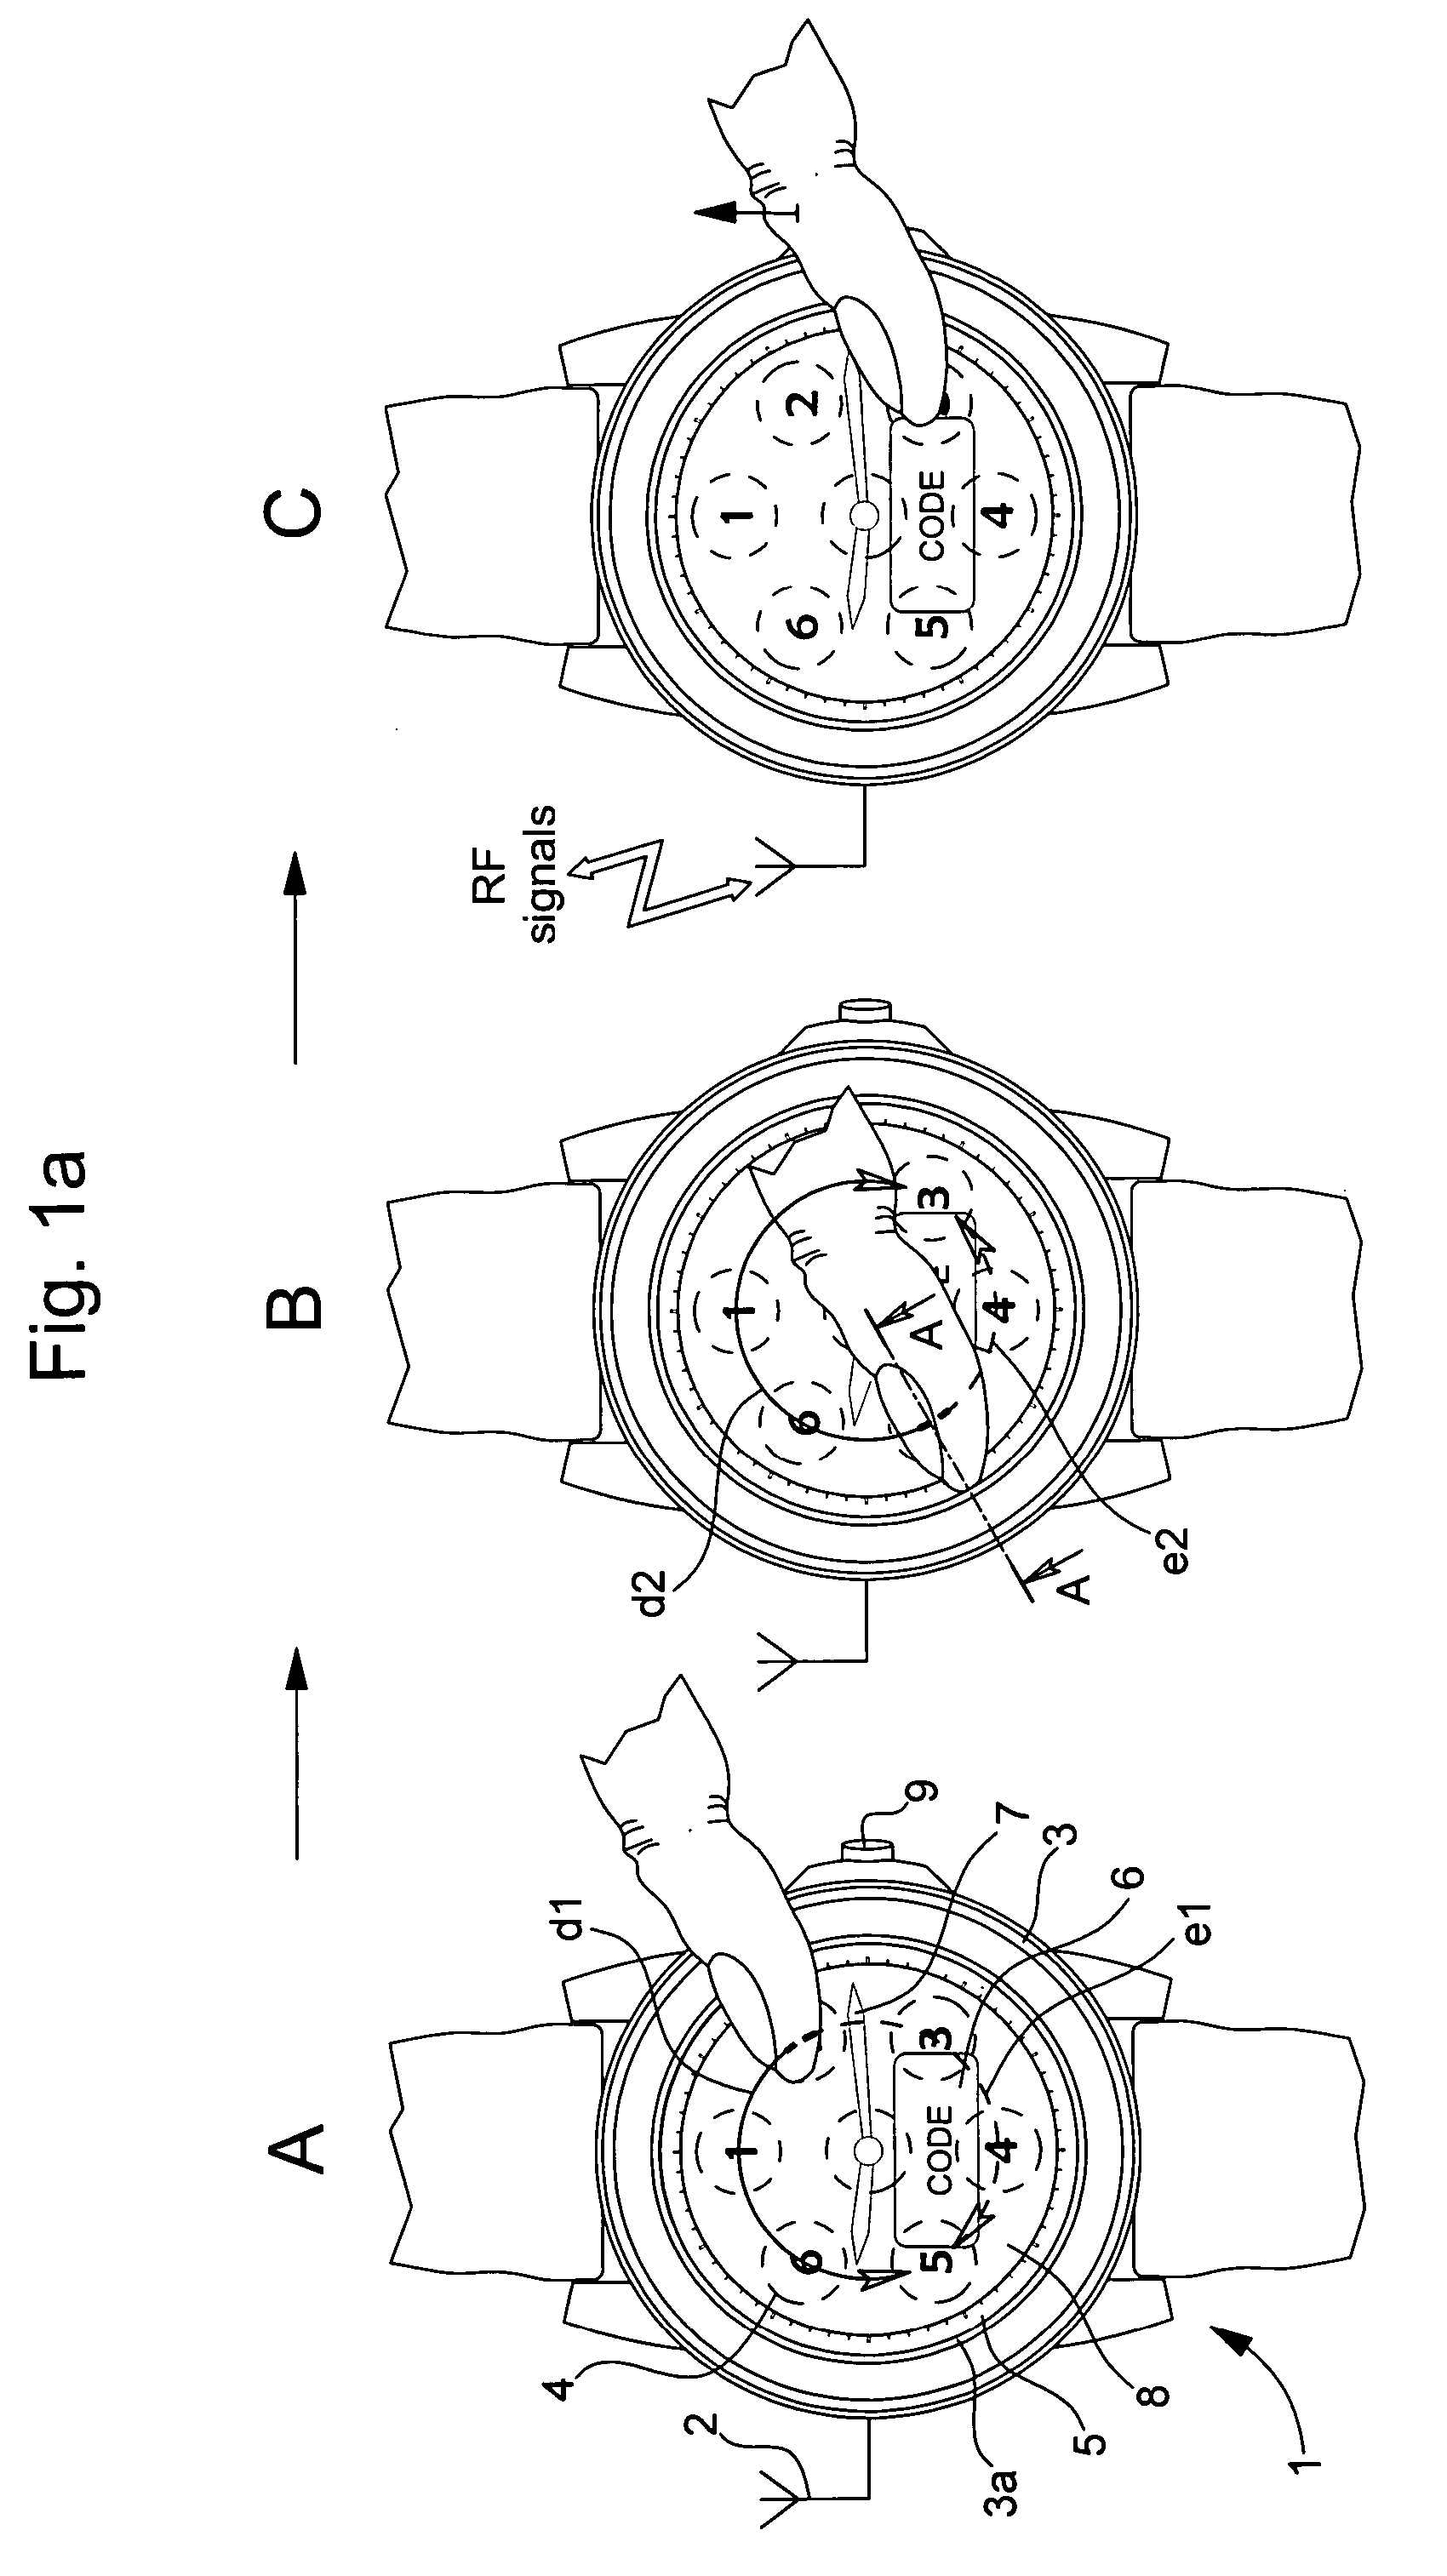 Method of input of a security code by means of a touch screen for access to a function, an apparatus or a given location, and device for implementing the same